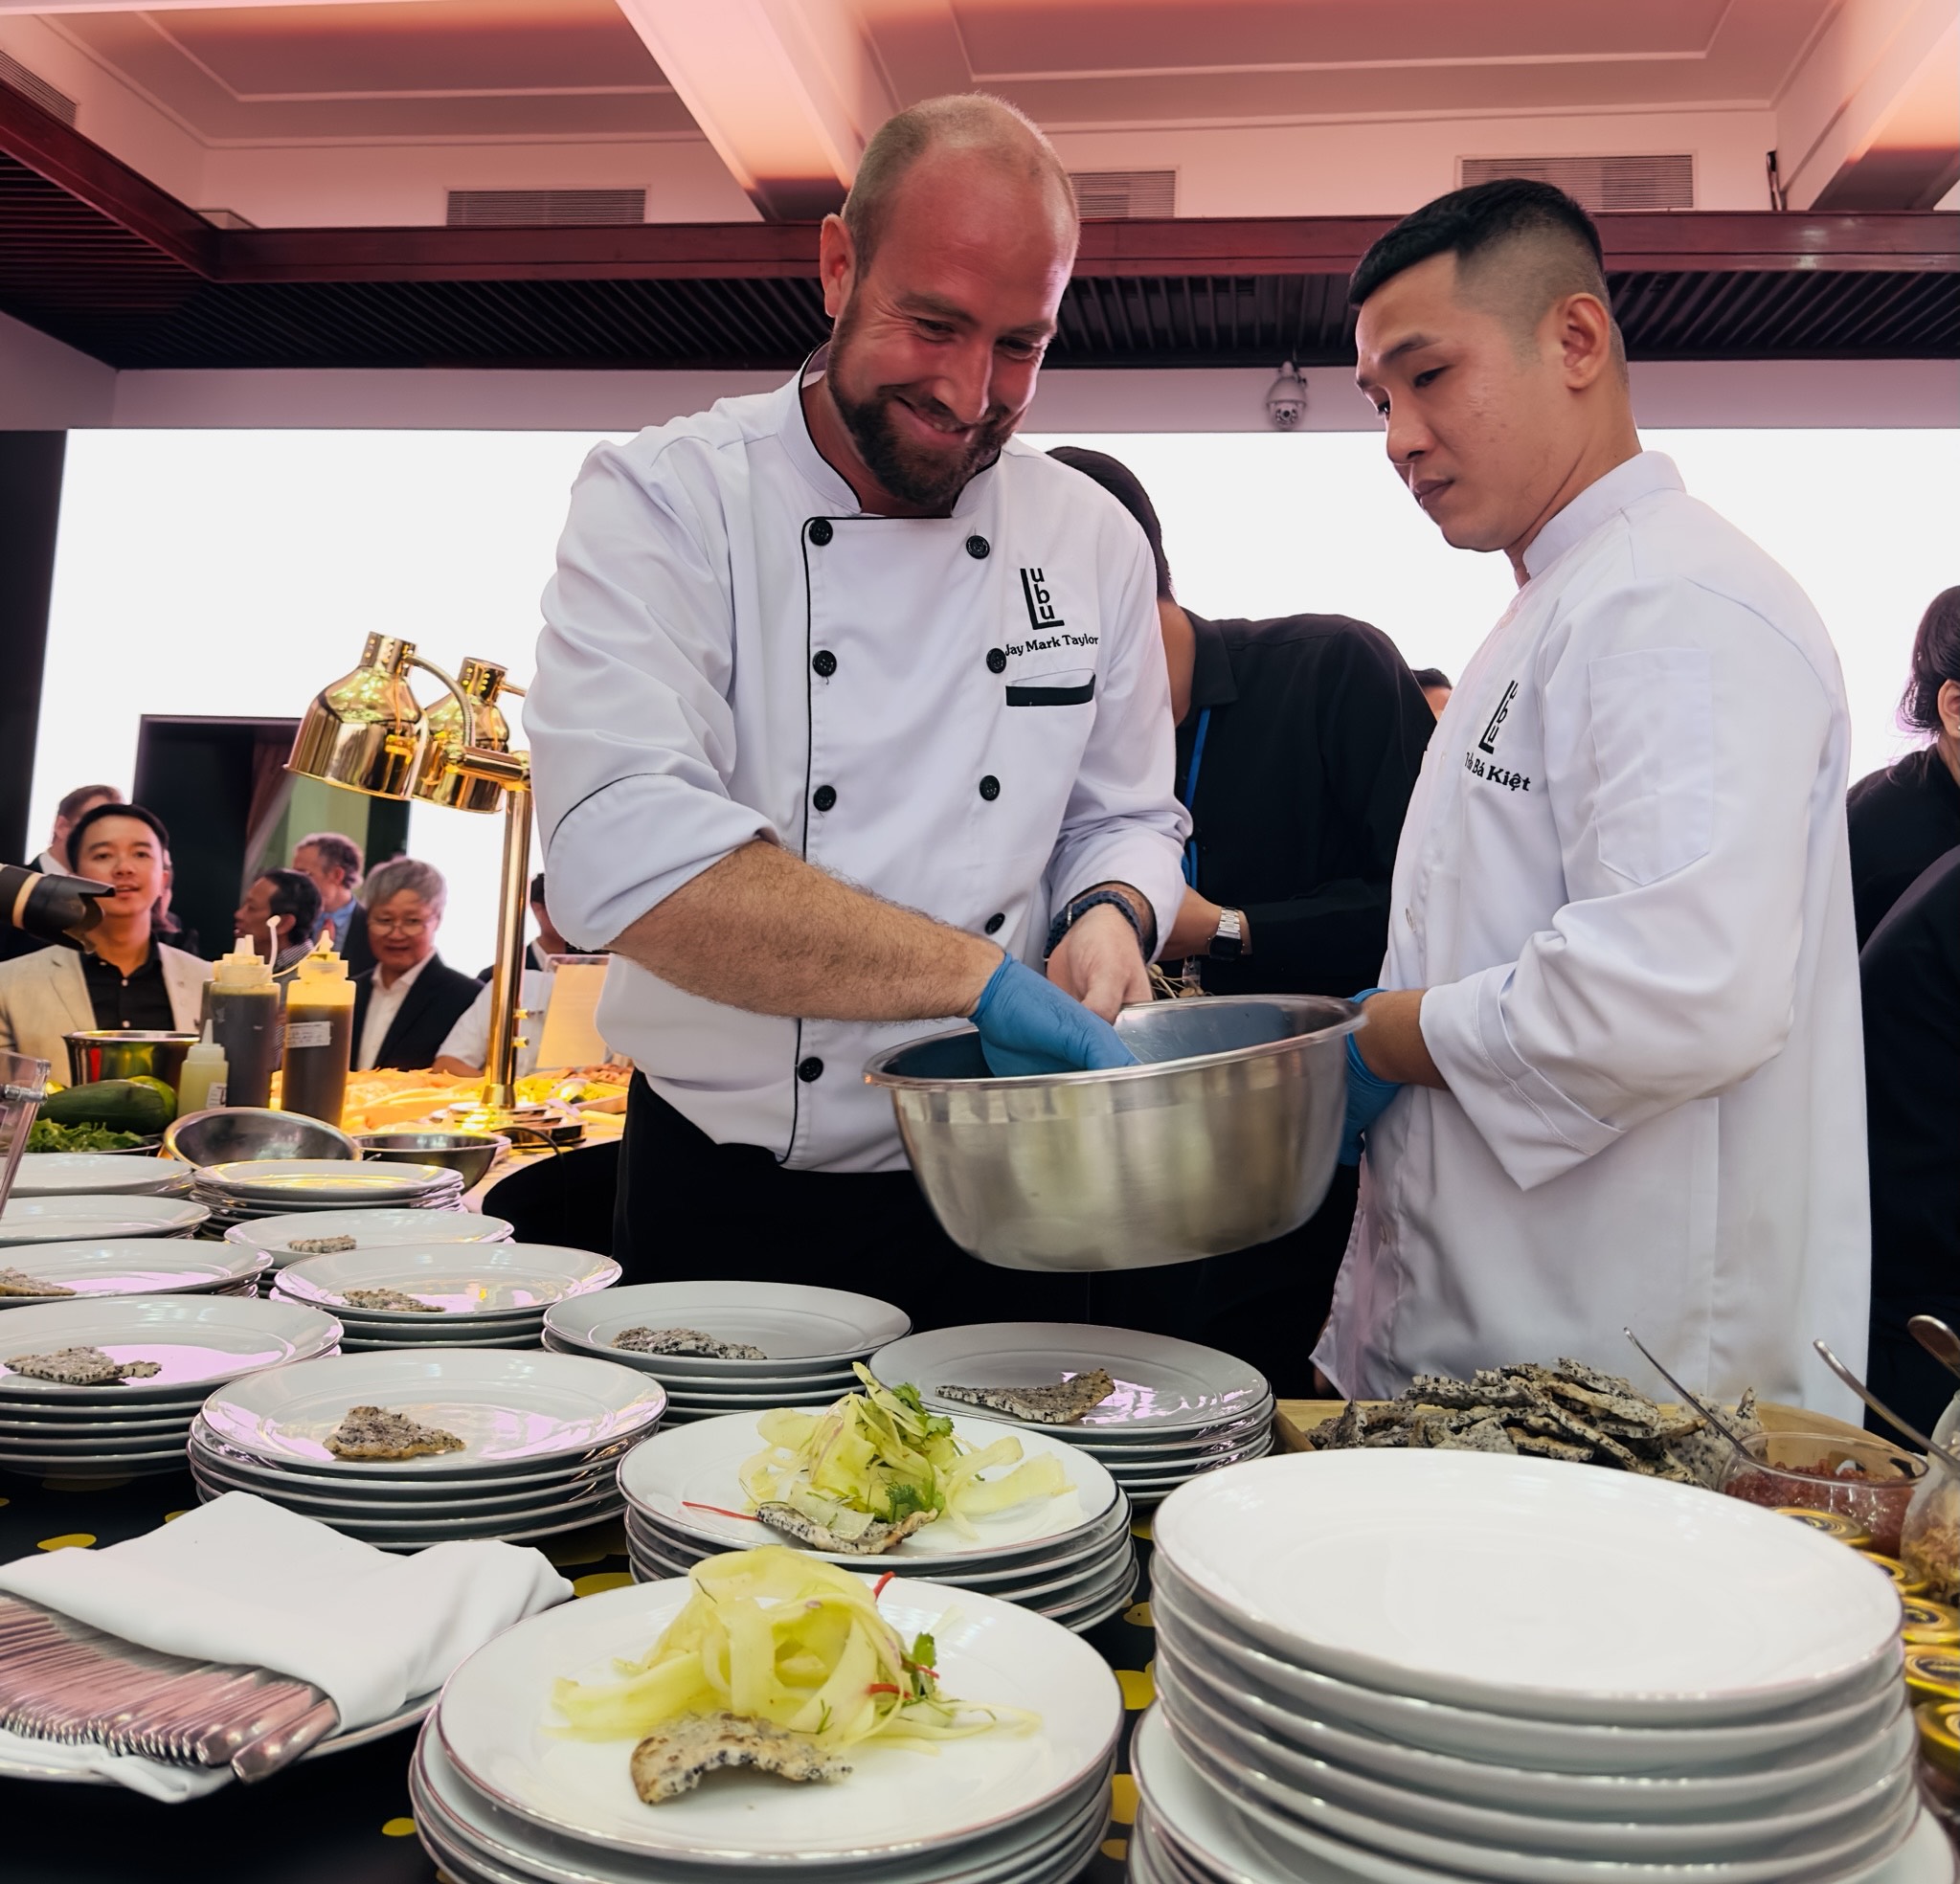 
			<p><em>A foreign chef prepares dishes for guests at Taste of Australia 2023 at the Reunification Palace on May 18, 2023. Photo:</em> Tieu Bac / Tuoi Tre News</p>
			